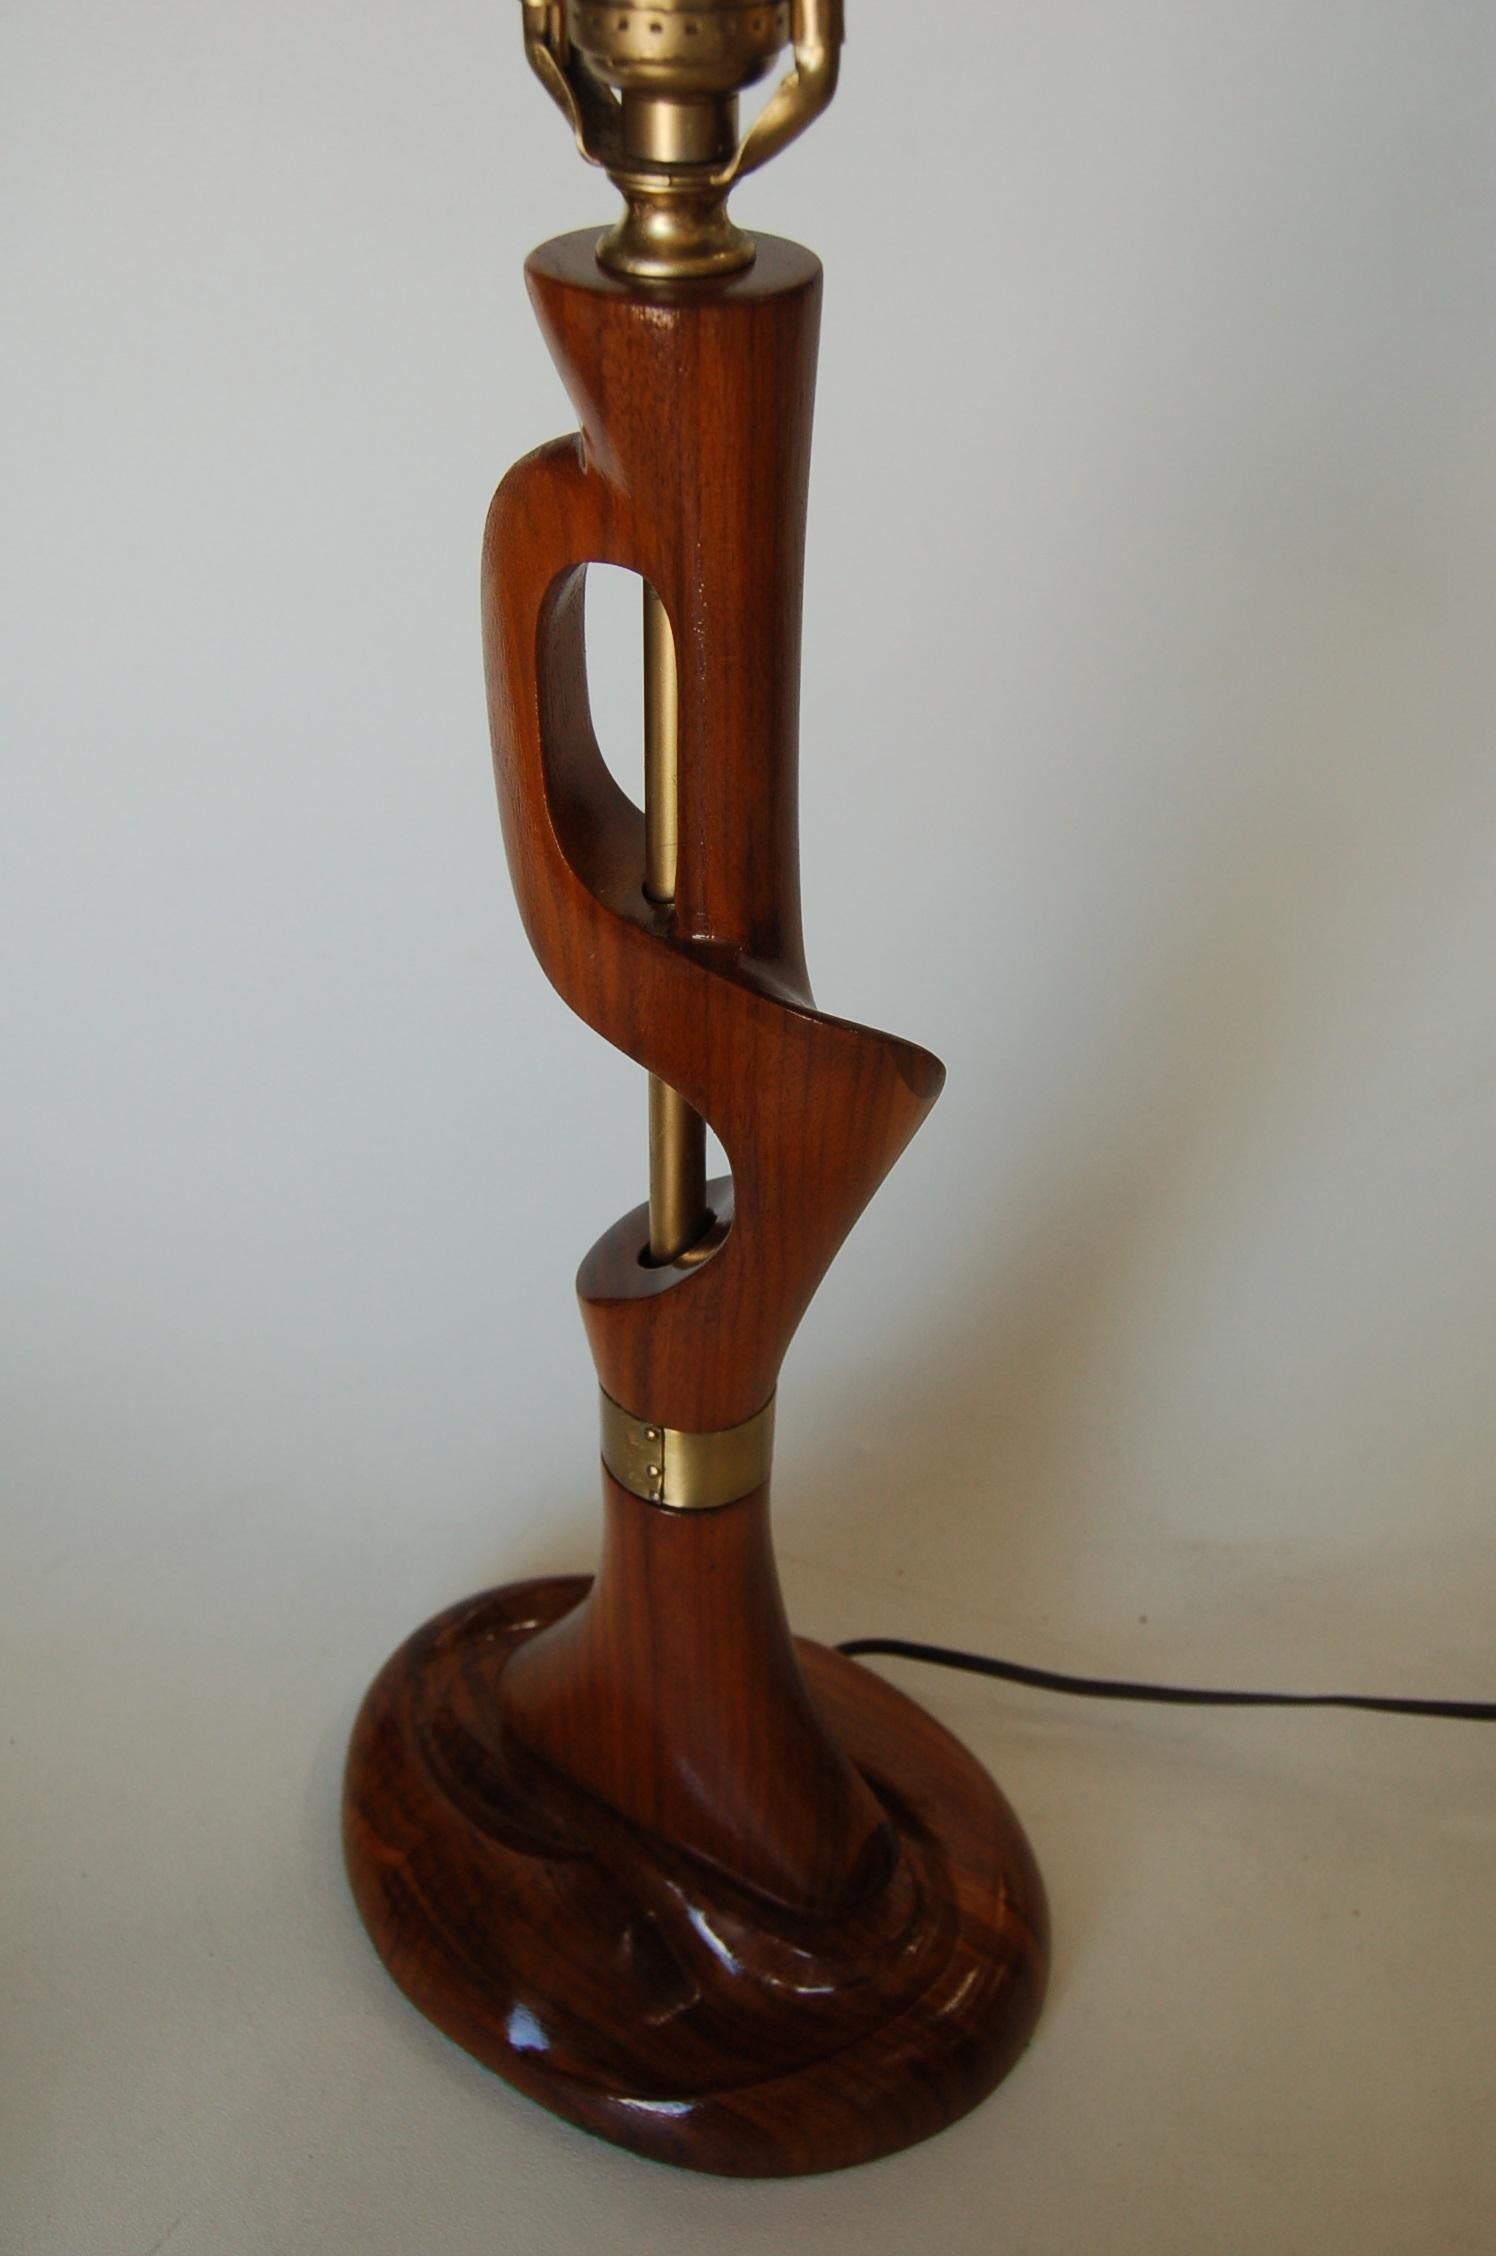 Freeform modernist carved mahogany table lamp and nailhead brass detail by Jascha Heifetz.

Measures: 9